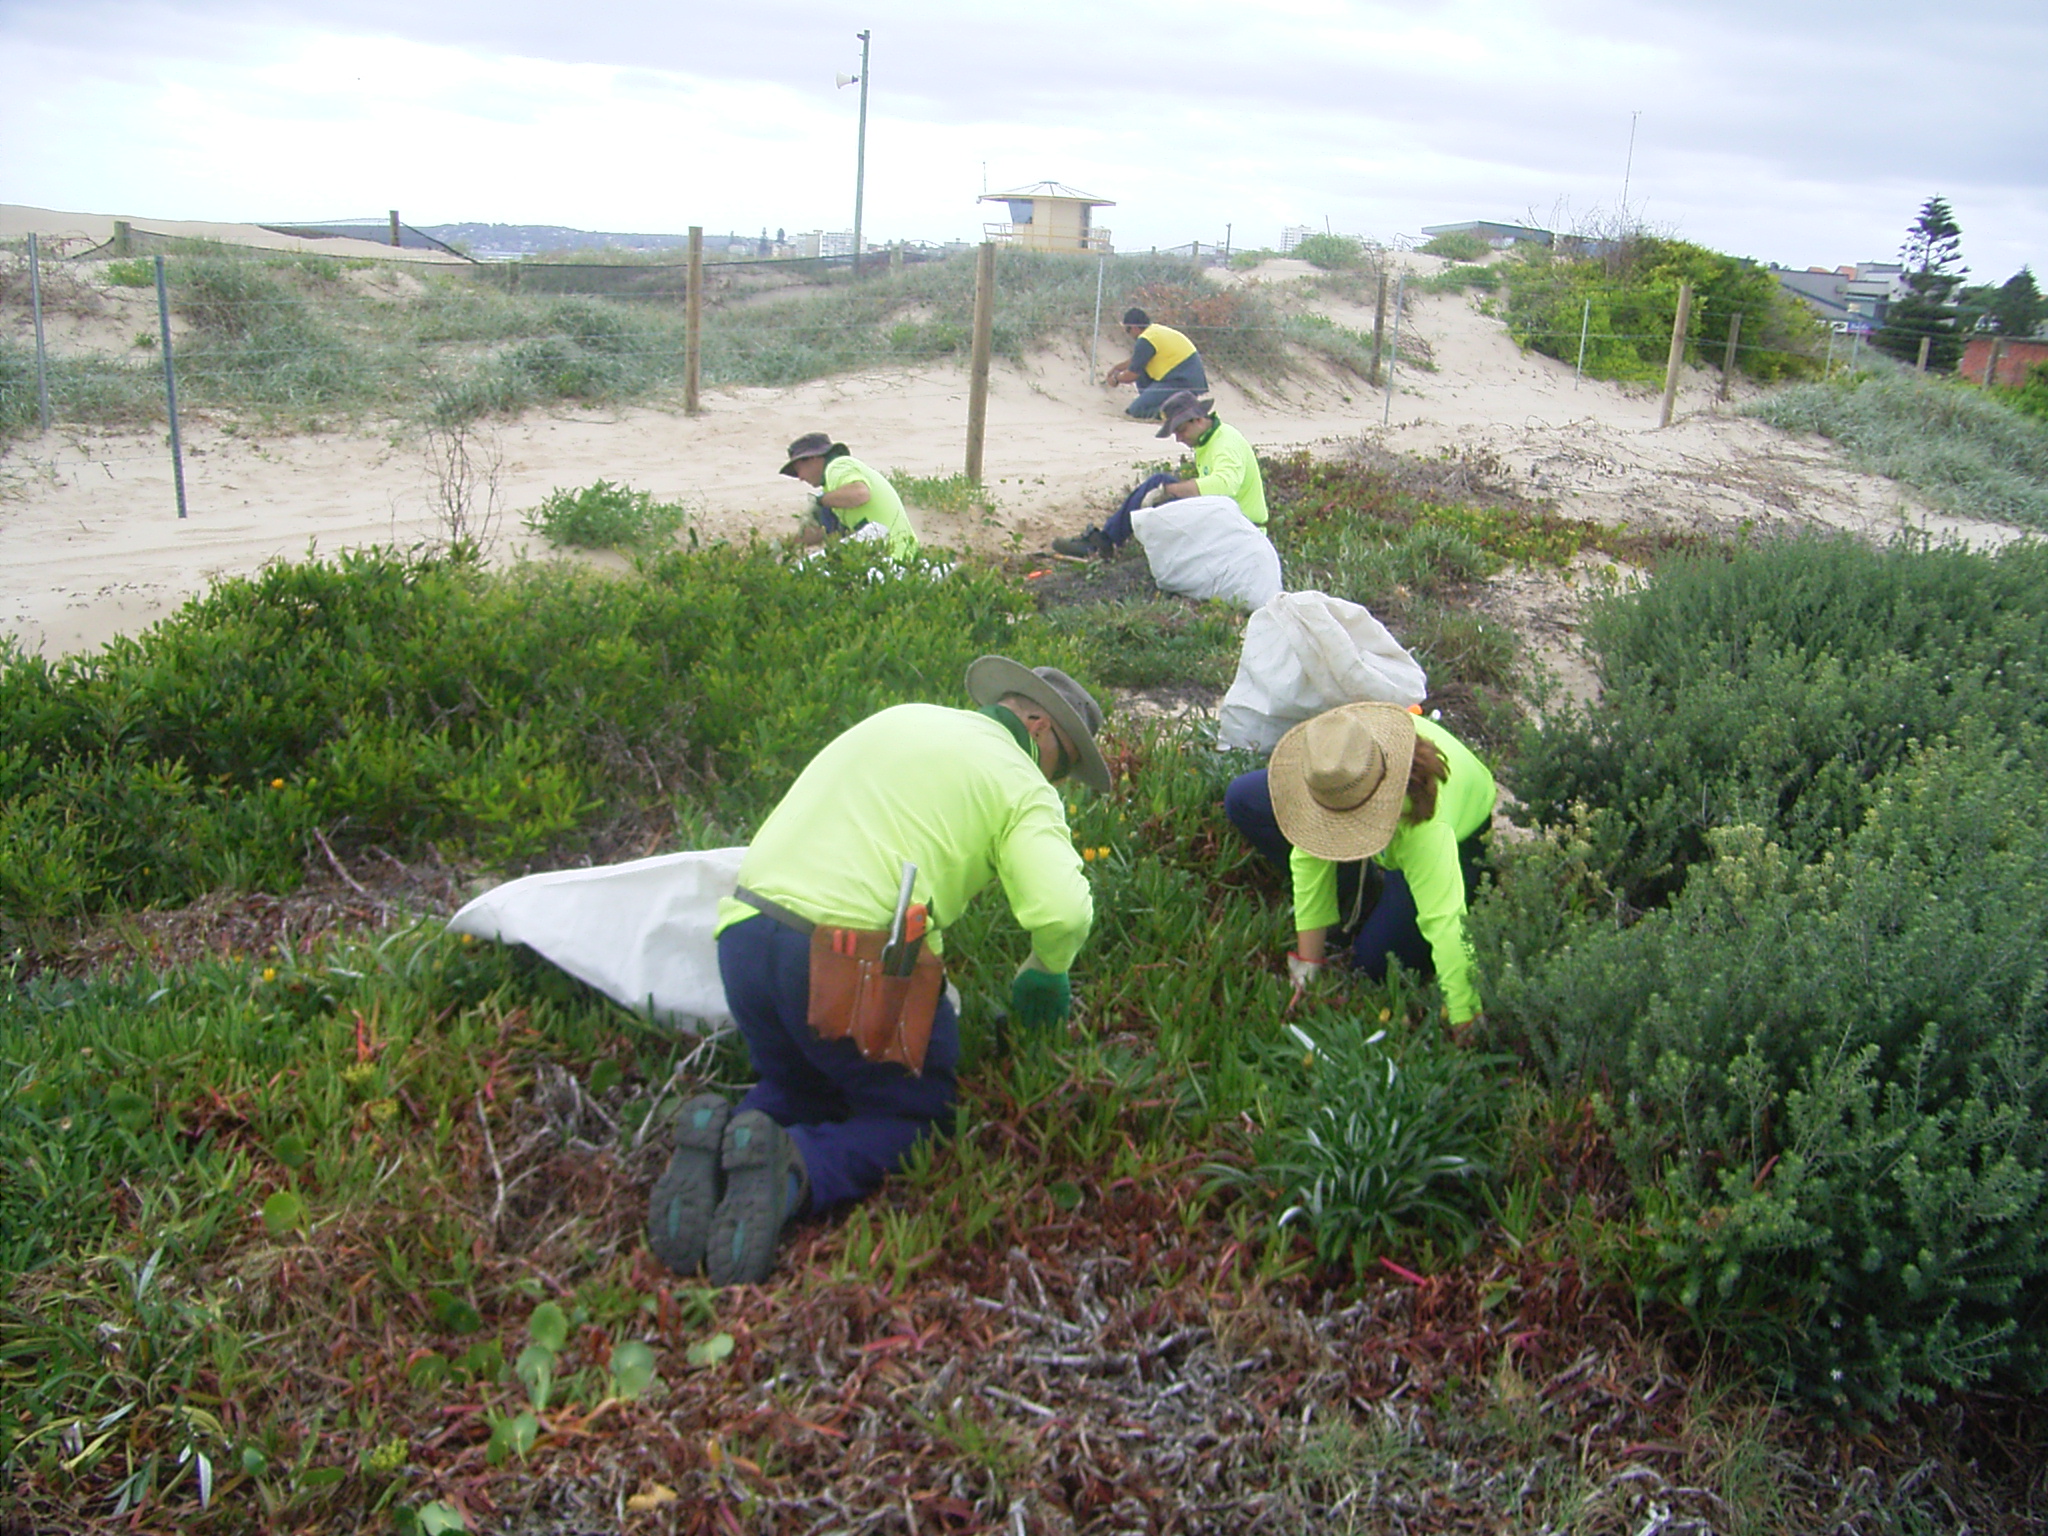 Sutherland Shire Council Bushcare is once again hosting a National Tree Day Event at Wanda Beach. The site forms part of the continuous dune system that stretches from Elouera Beach to Boat Harbour and forms an important corridor of vegetation. The